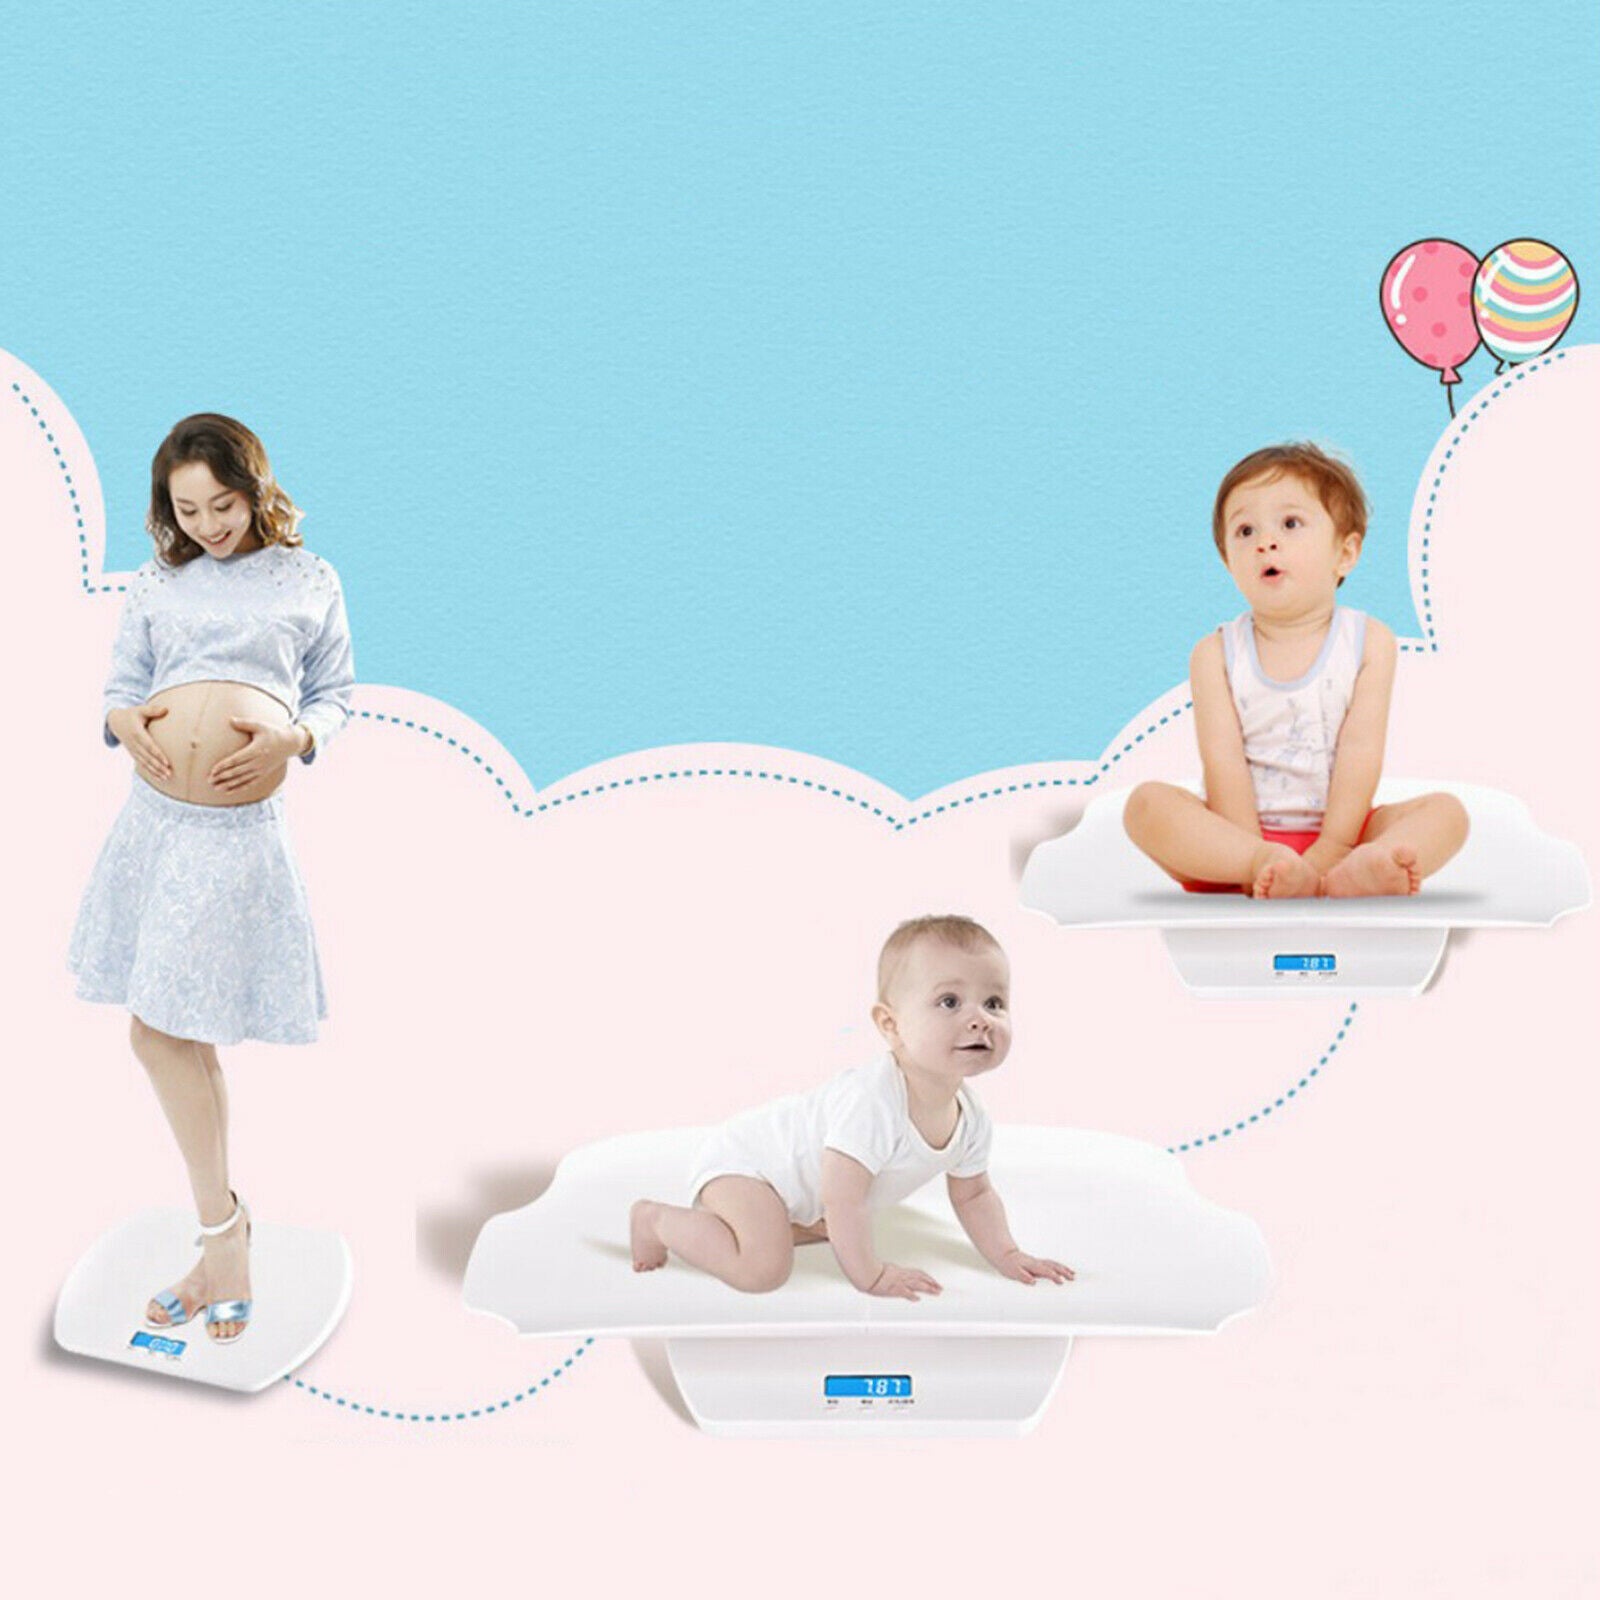 100kg/10g Electronic Baby Weighing Scale Infant Pet Toddler Digital Scales